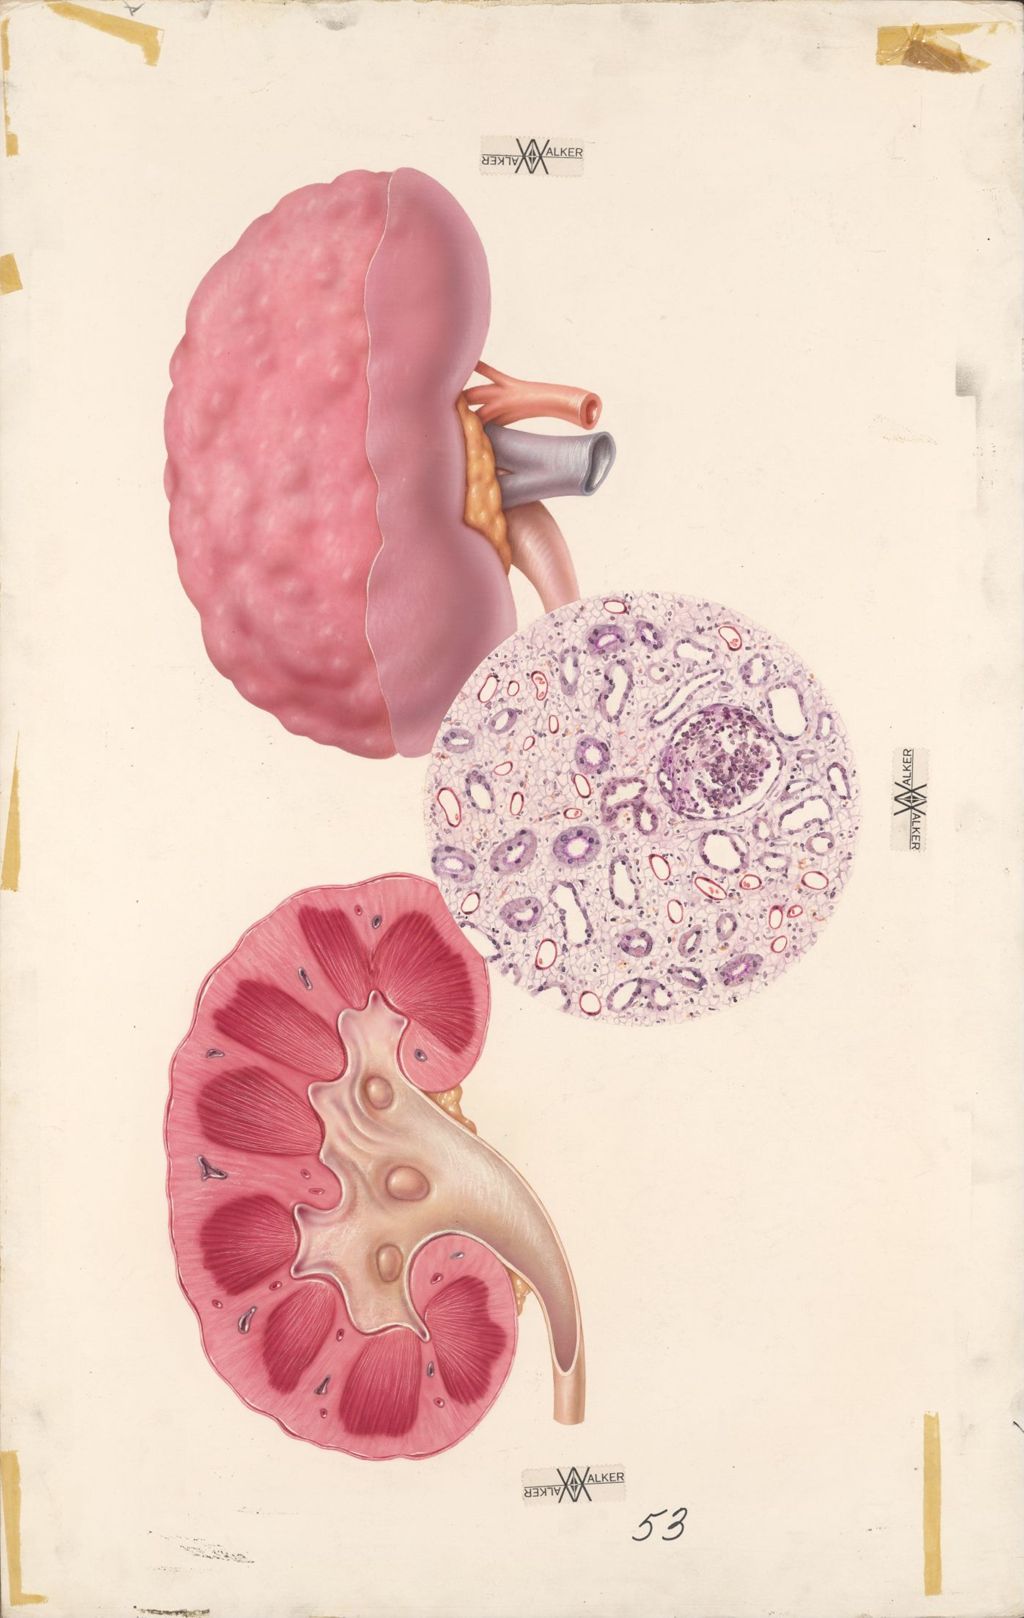 Miniature of Medical profiles, Diuril and Hydrodiuril, Chronic Glomerulonephritis